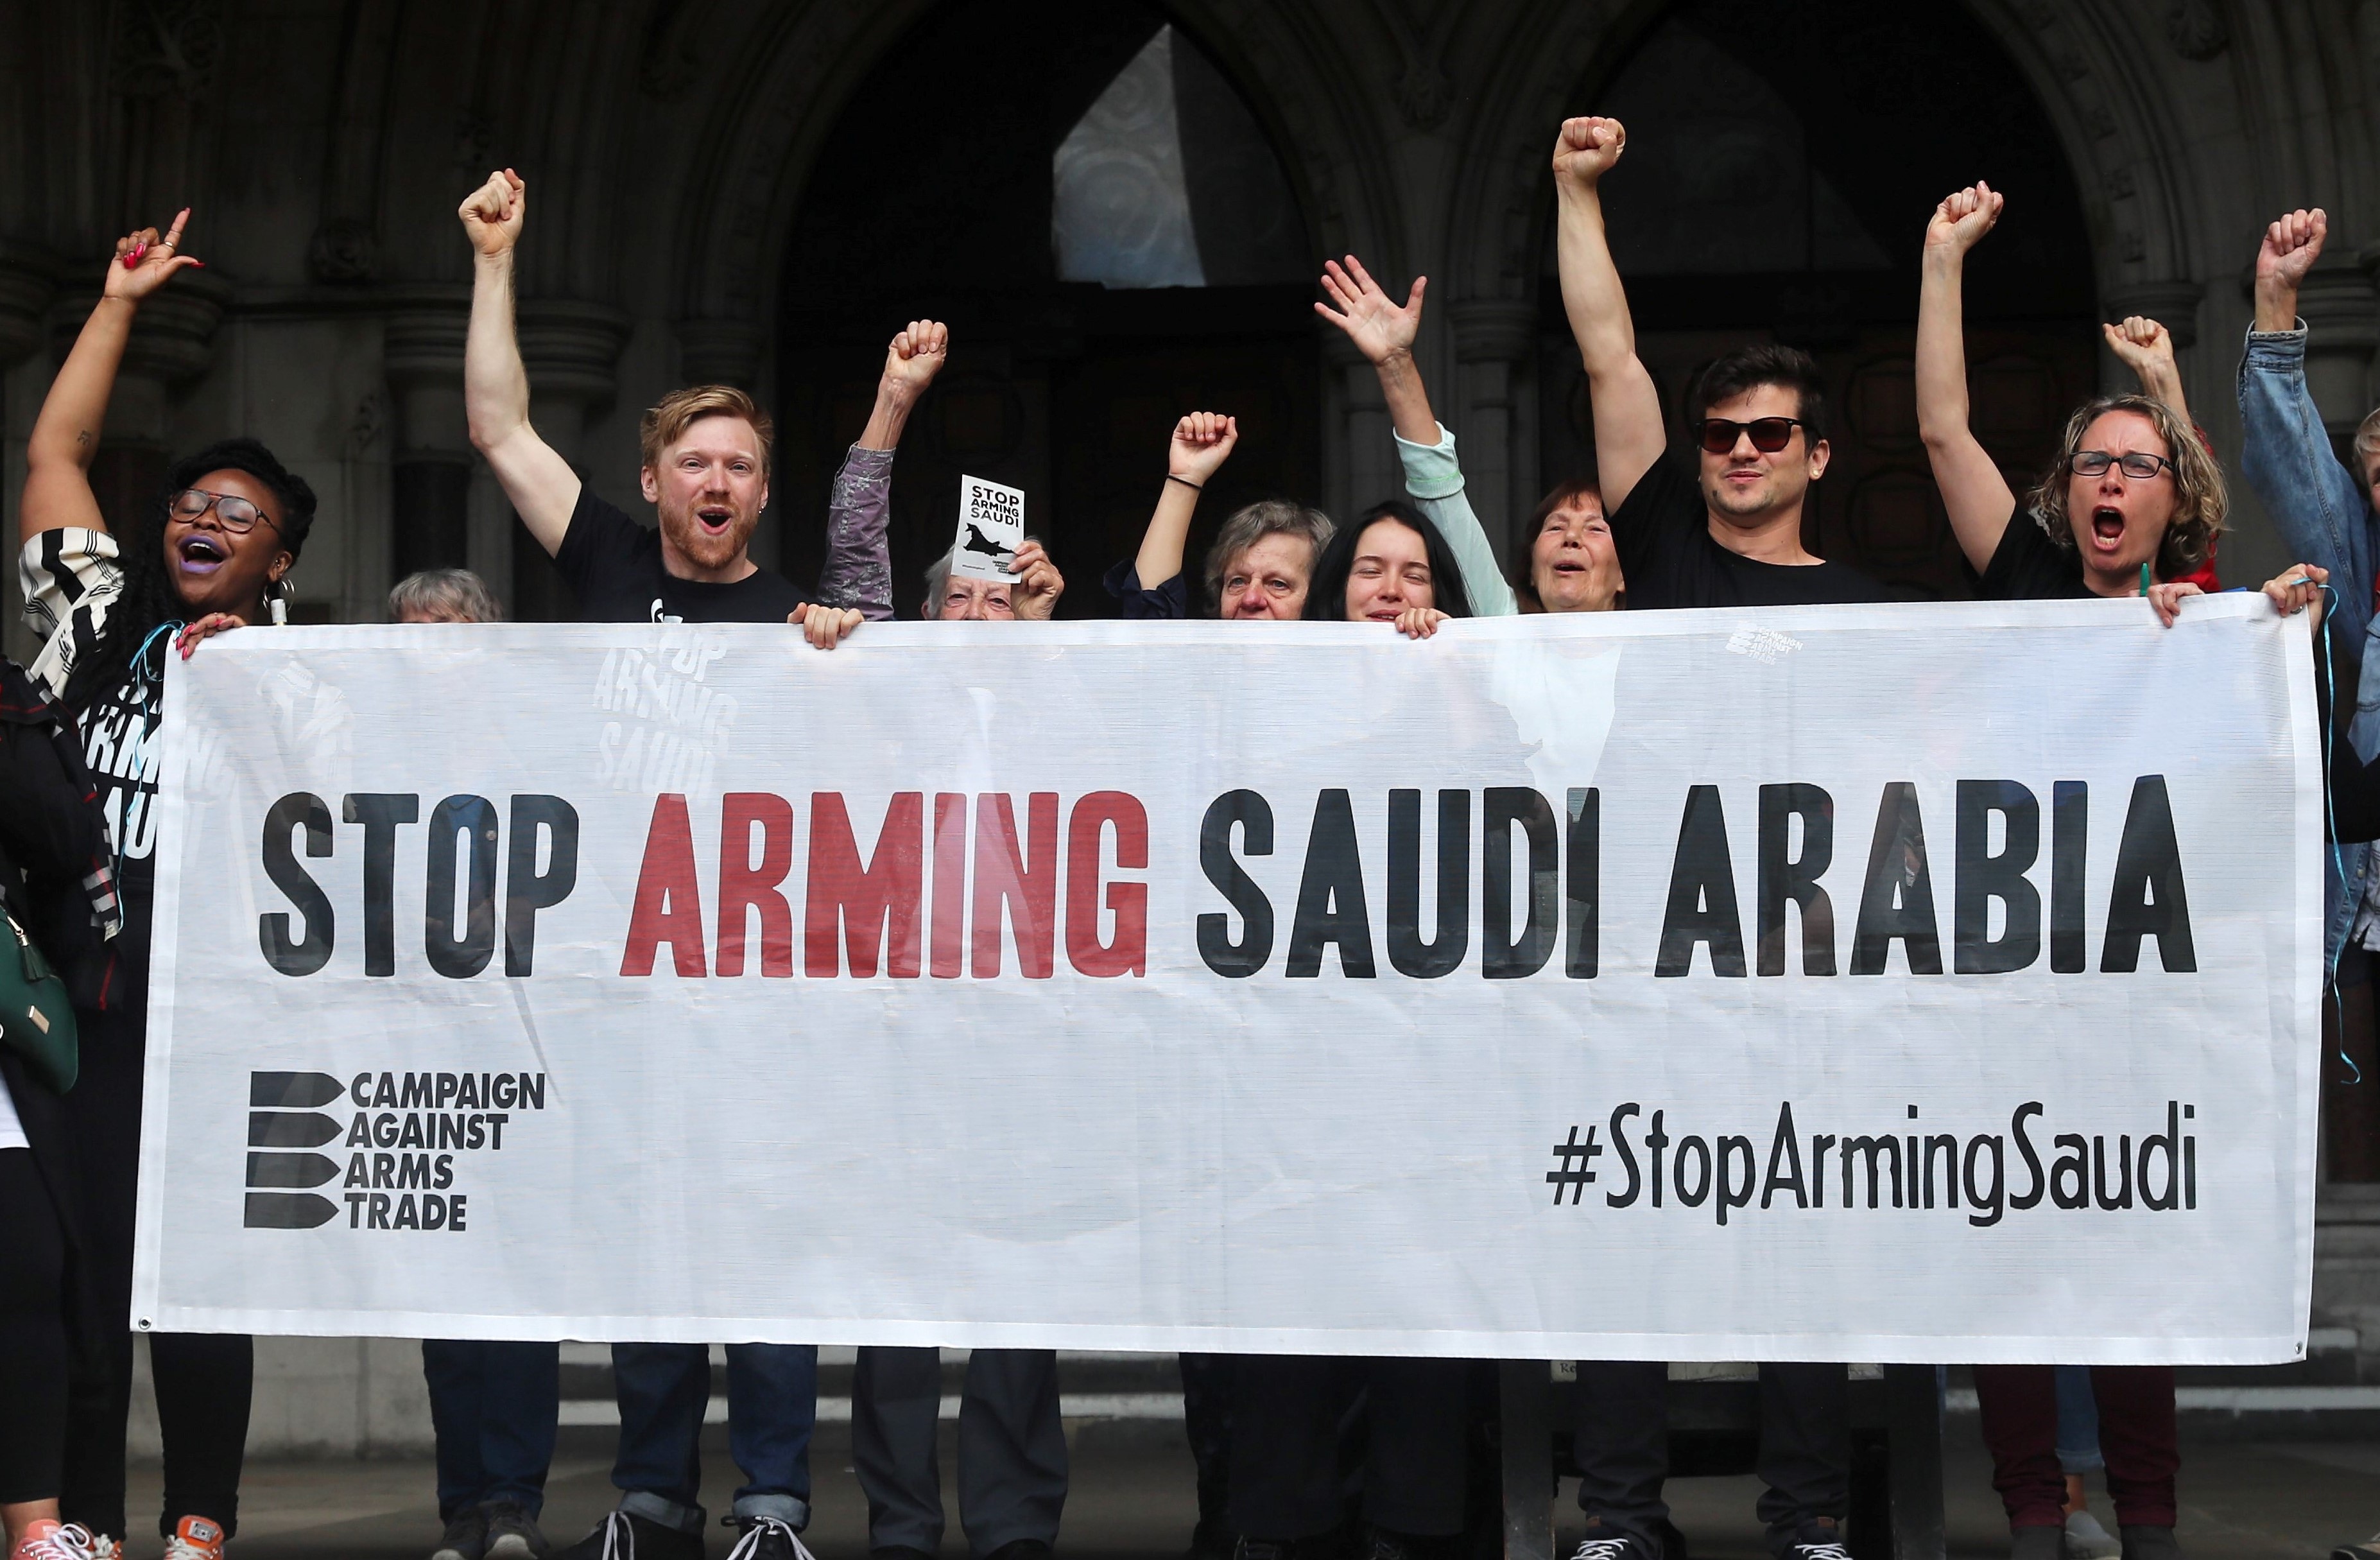 Demonstrators outside the Court of Appeal after court ruled UK arms sales to Saudis unlawful on 20 June (Reuters)